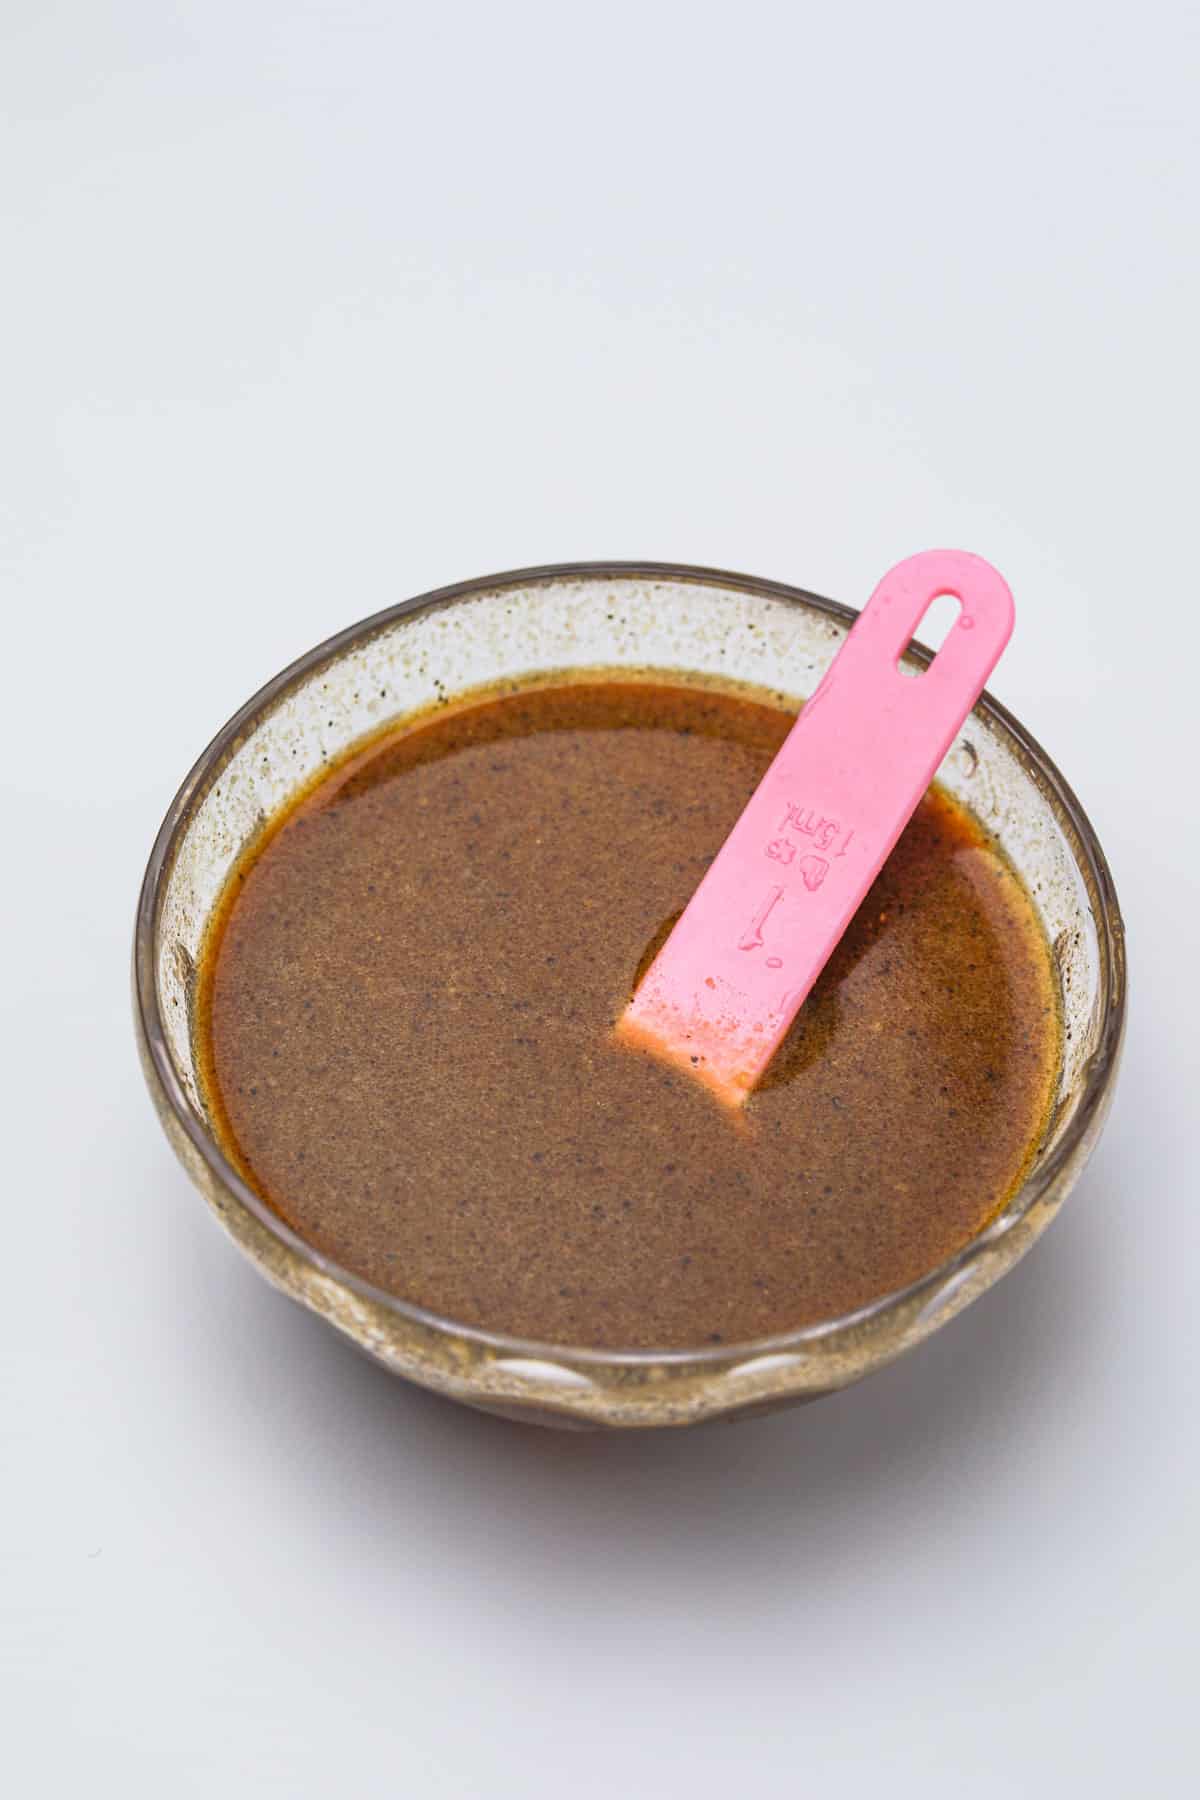 stir fry sauce in a bowl with pink spoon.